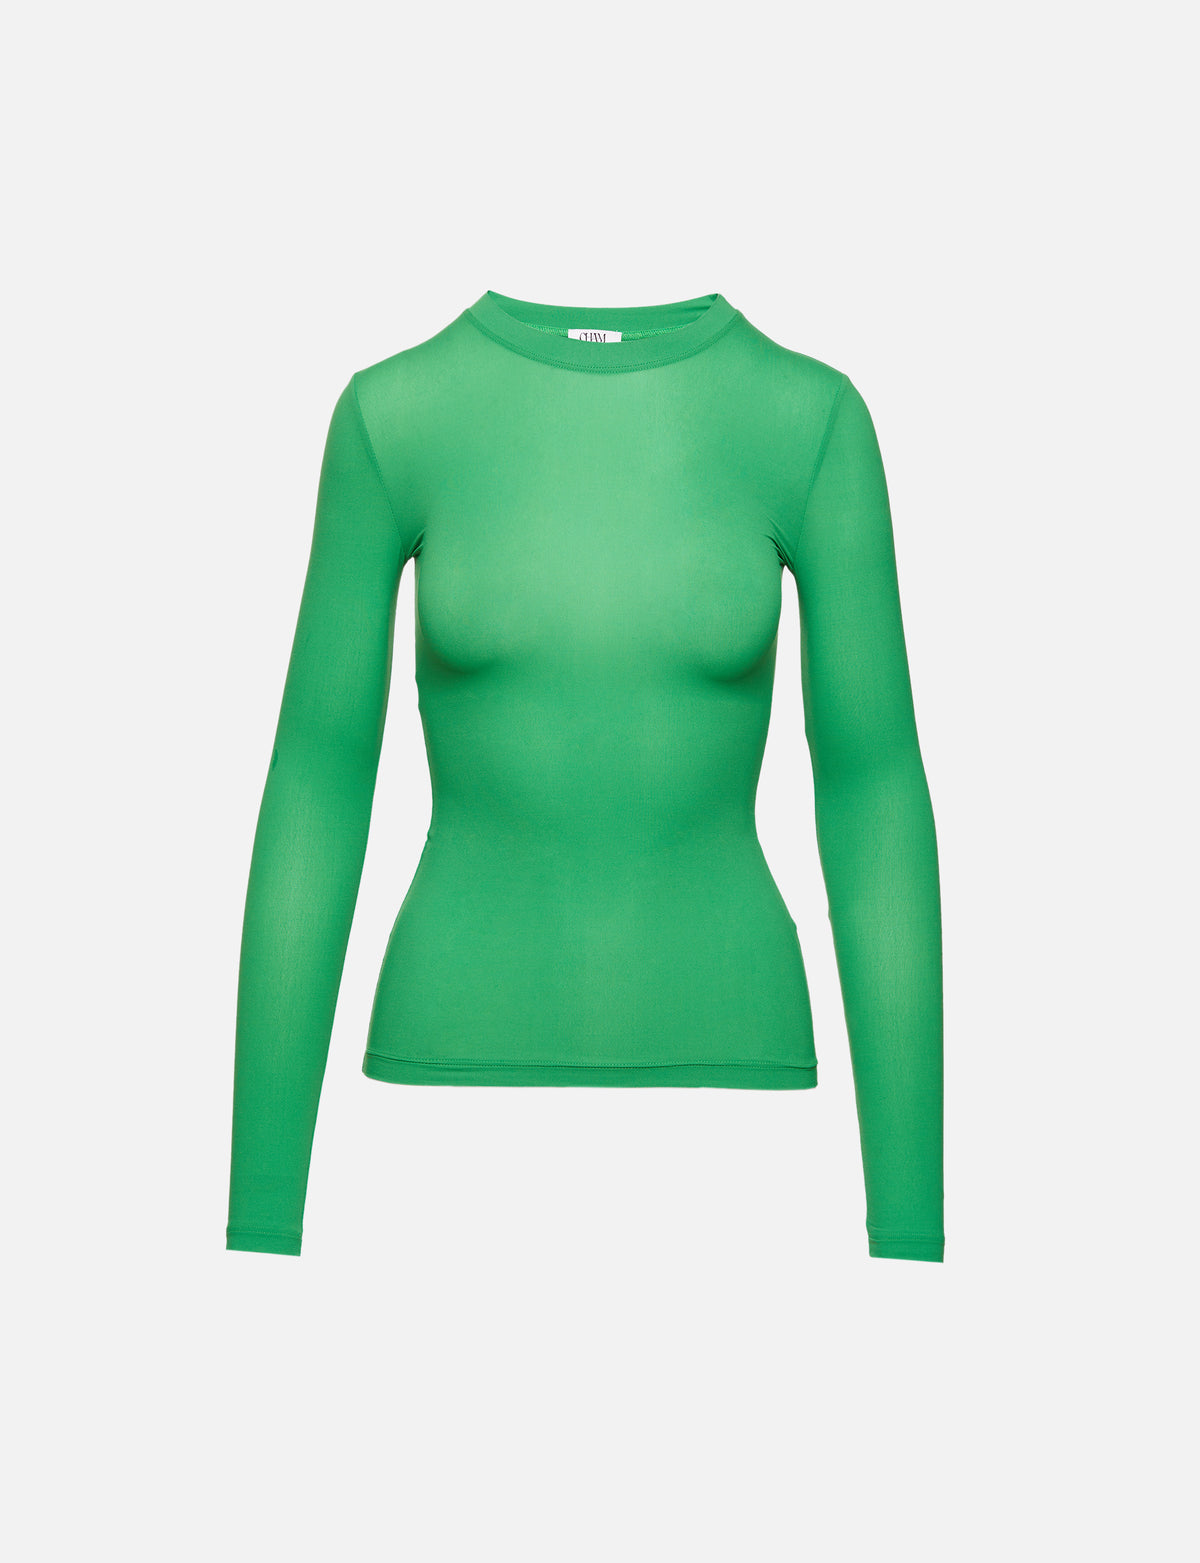 view 1 - Long Sleeve Top